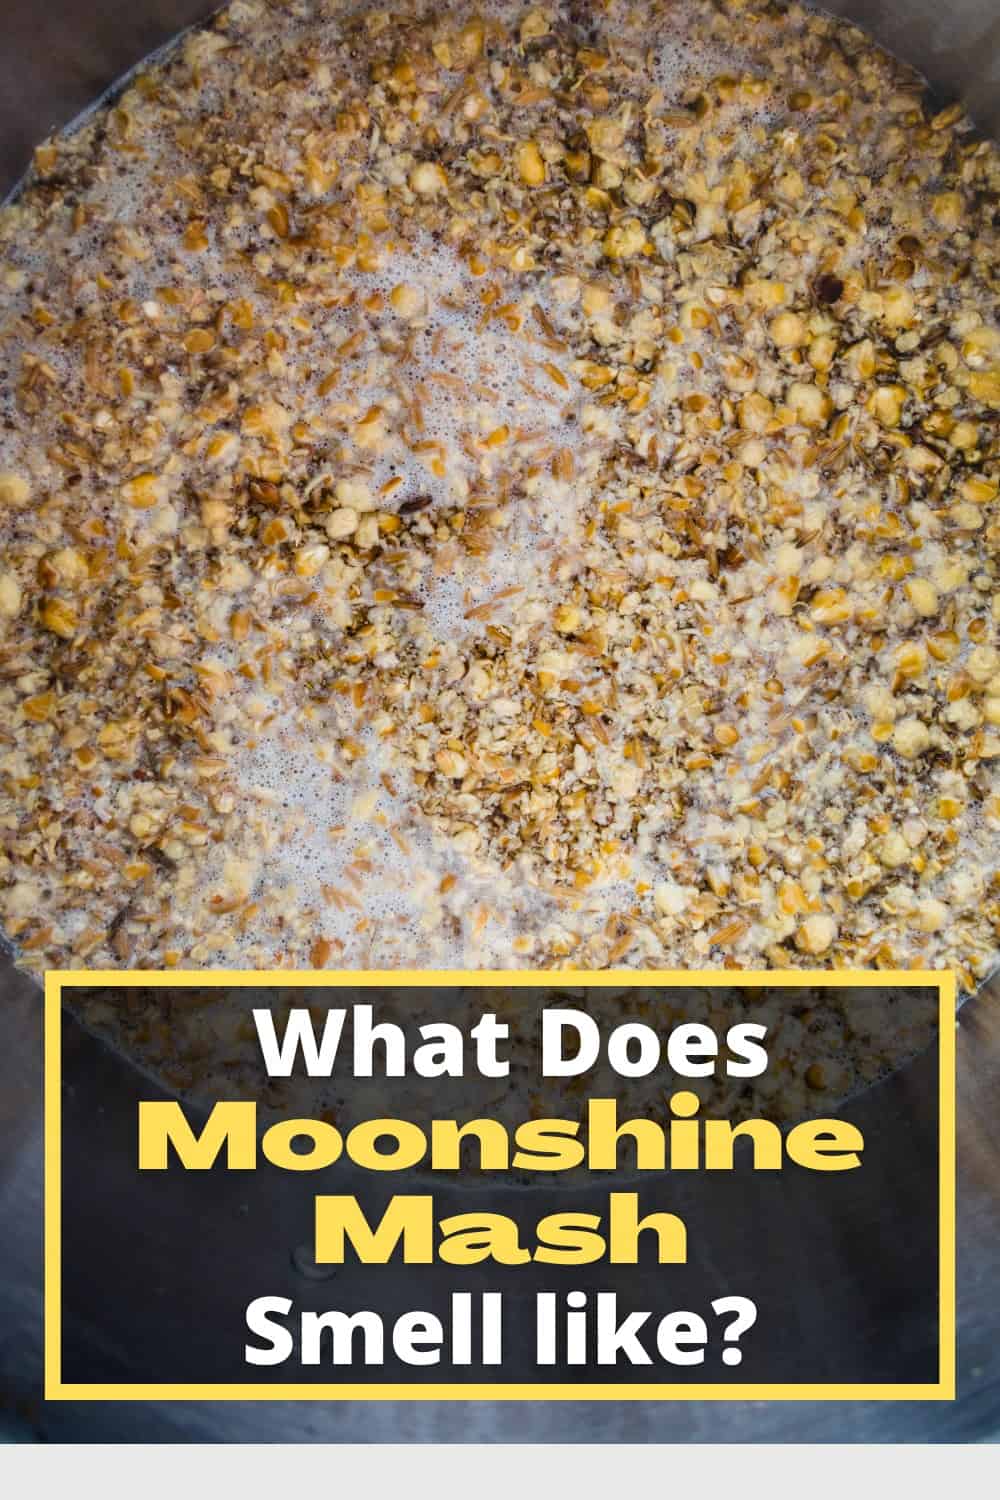 Moonshine mash has a strong yeasty smell